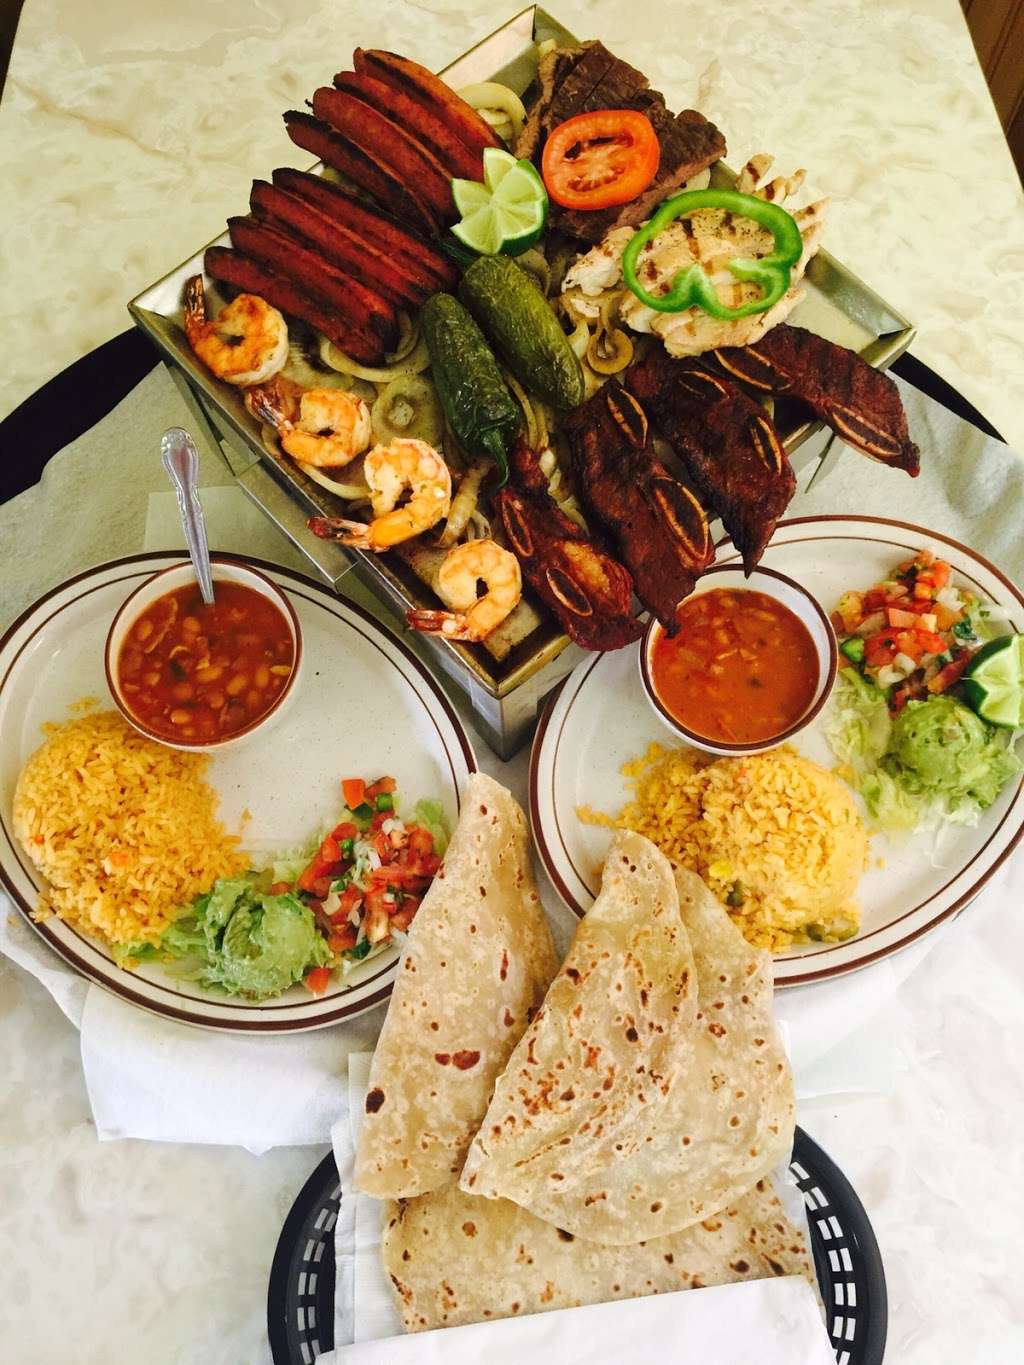 RODEO MEXICAN RESTAURANT | 15510 State Ave #11, Basehor, KS 66007 | Phone: (913) 662-7130